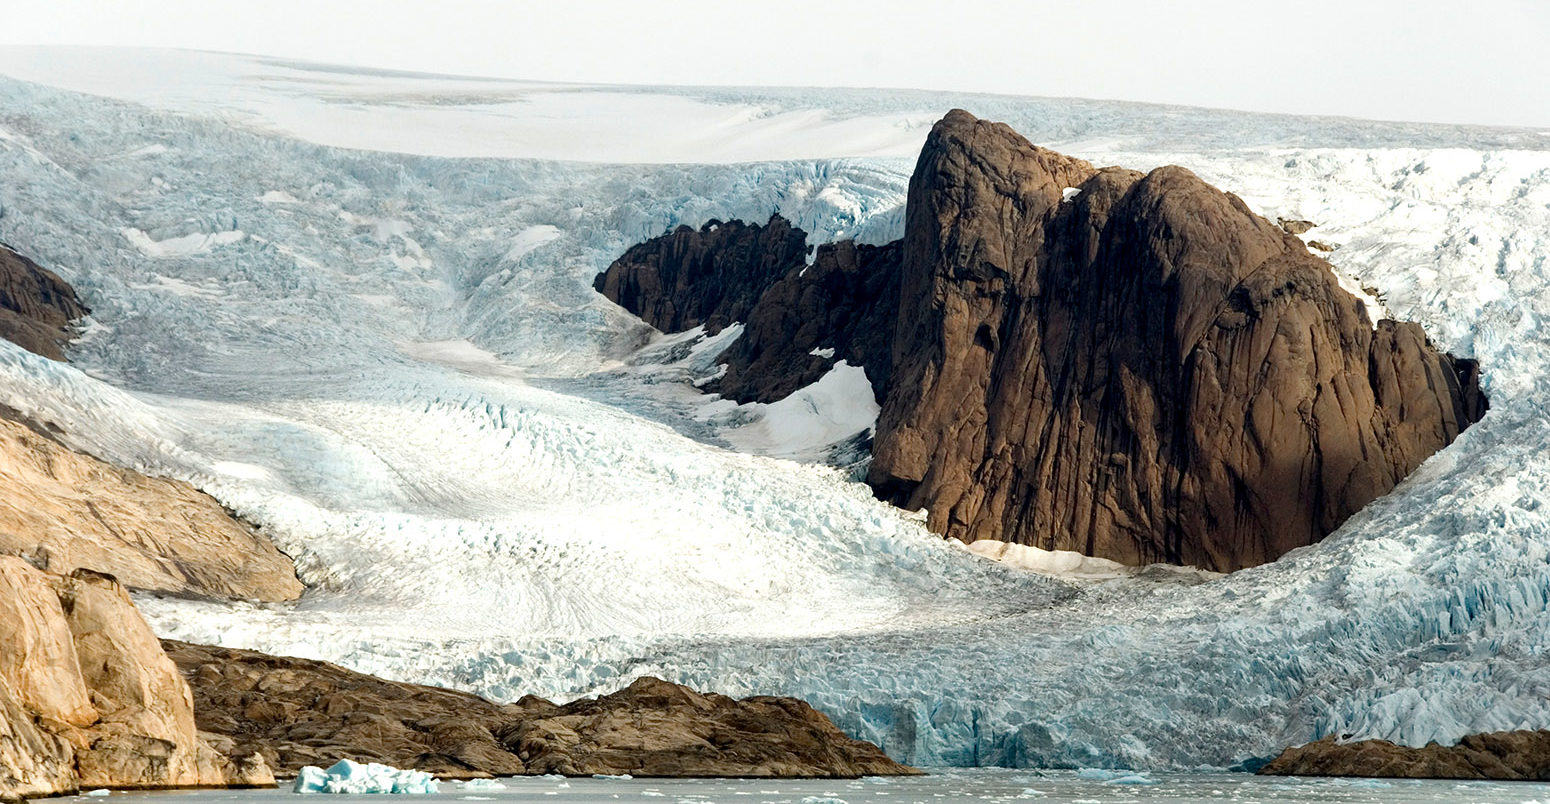 Outlet glaciers descending from main ice sheet, southern tip of Greenland. Credit: robertharding / Alamy Stock Photo. CFCT8J